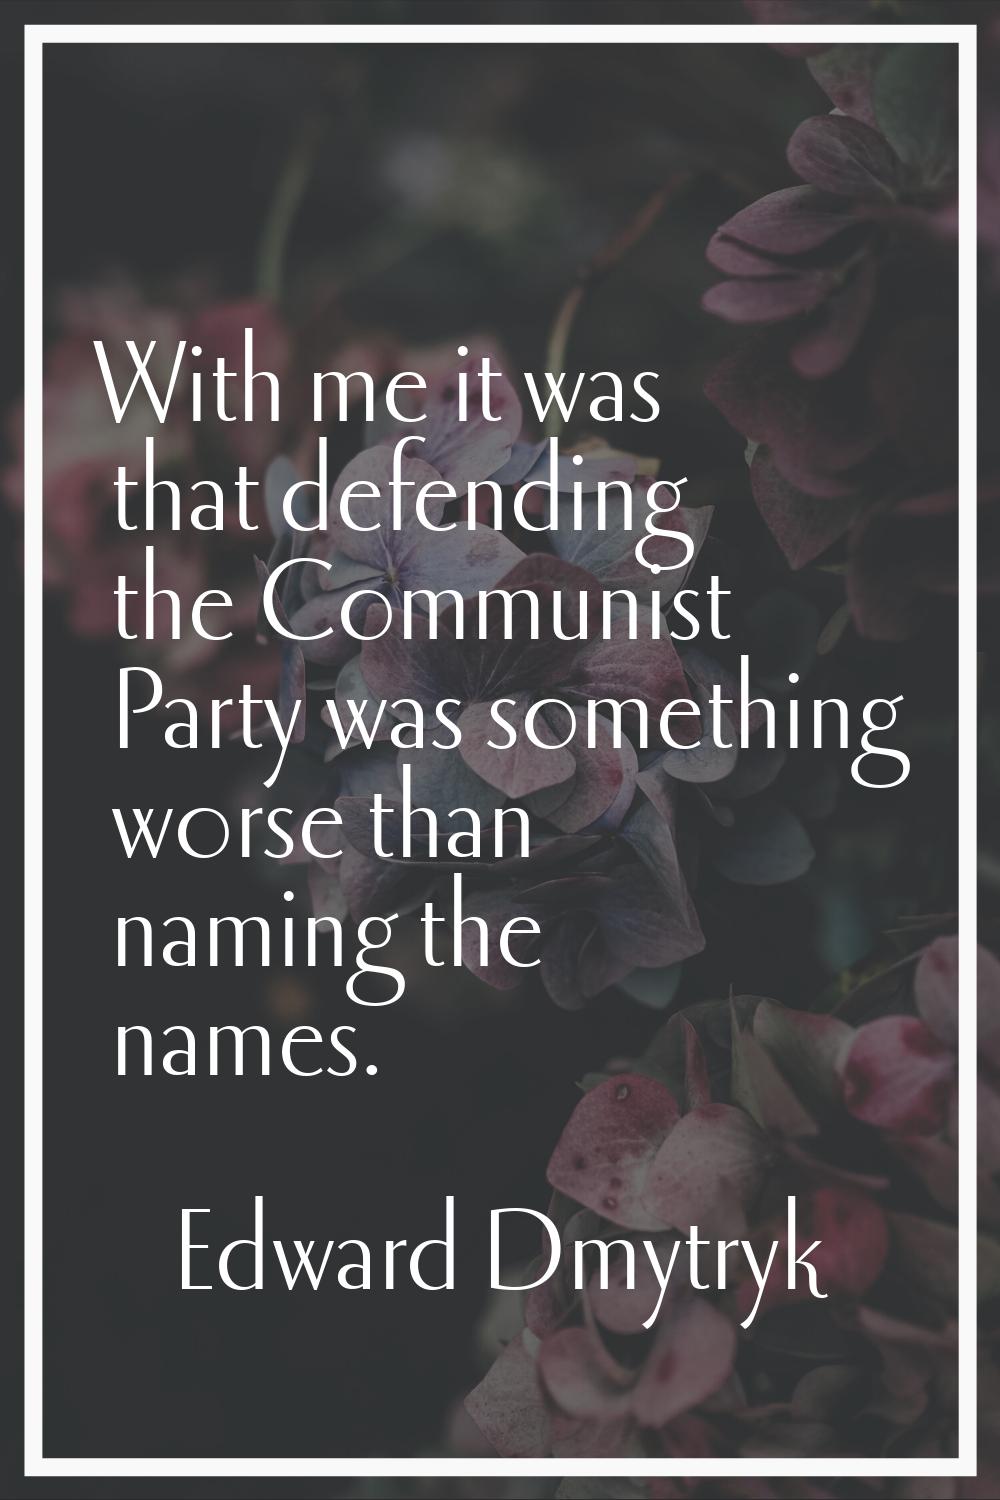 With me it was that defending the Communist Party was something worse than naming the names.